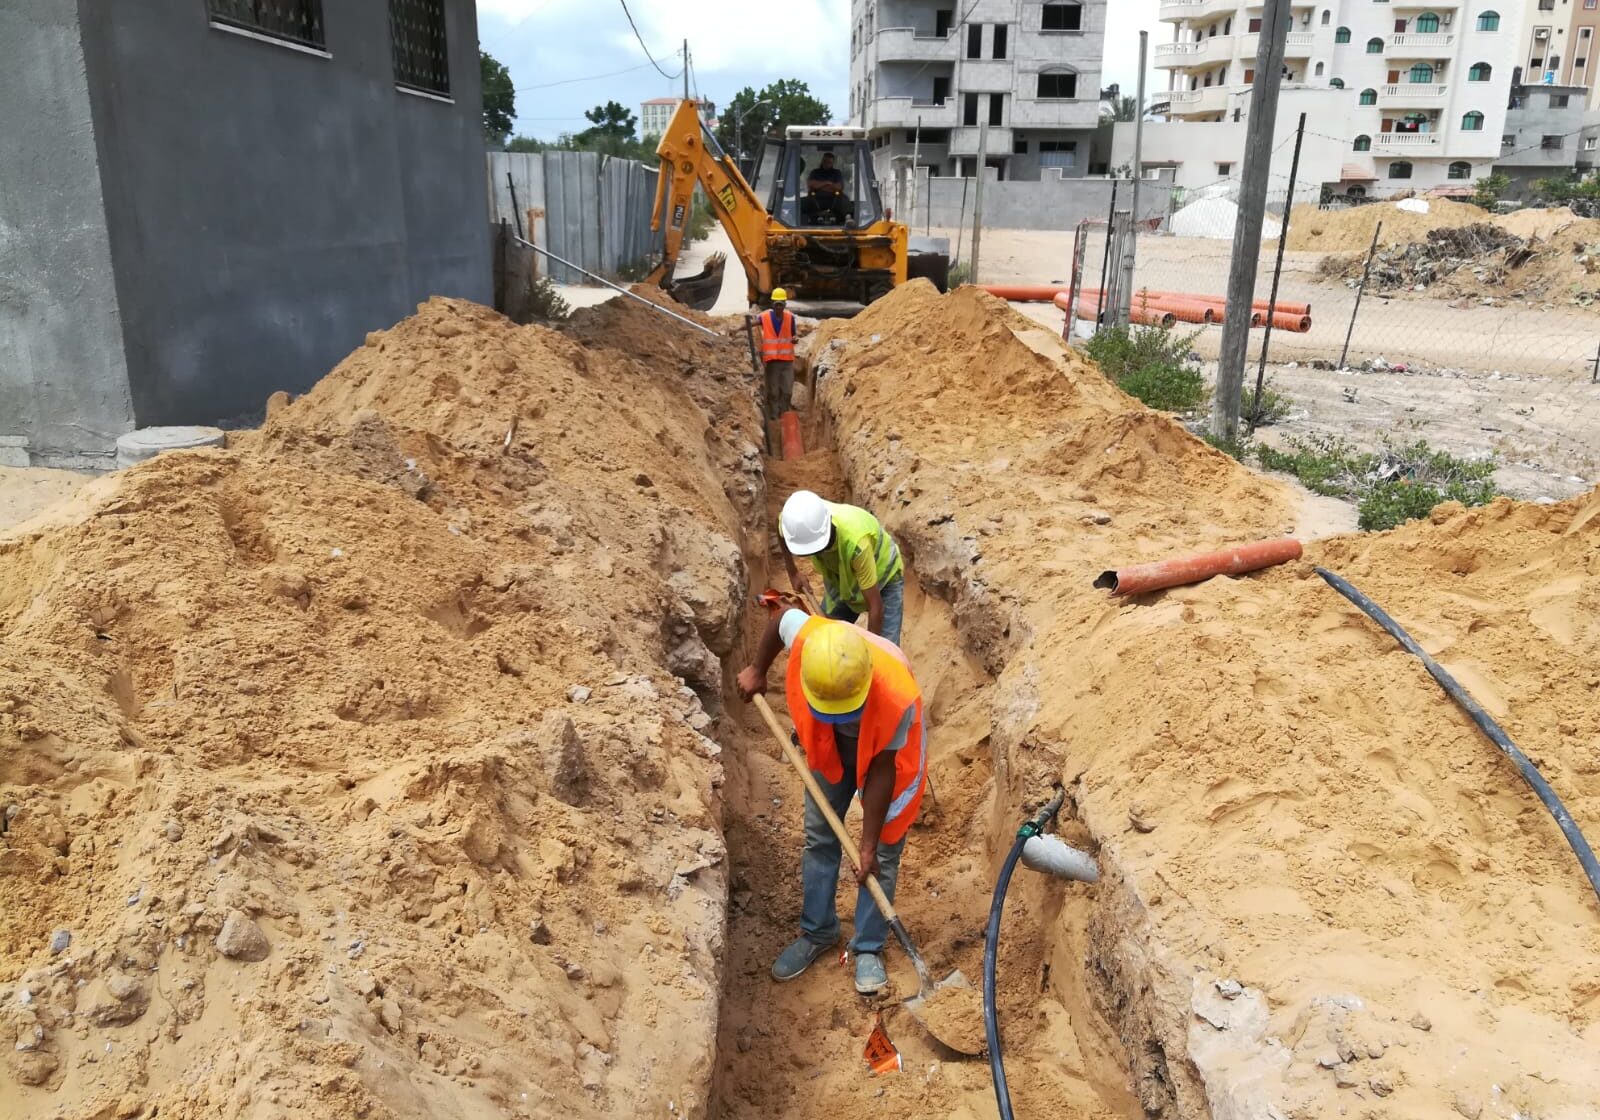 Anera installing new sewage and water lines in Zeitoun, Gaza.